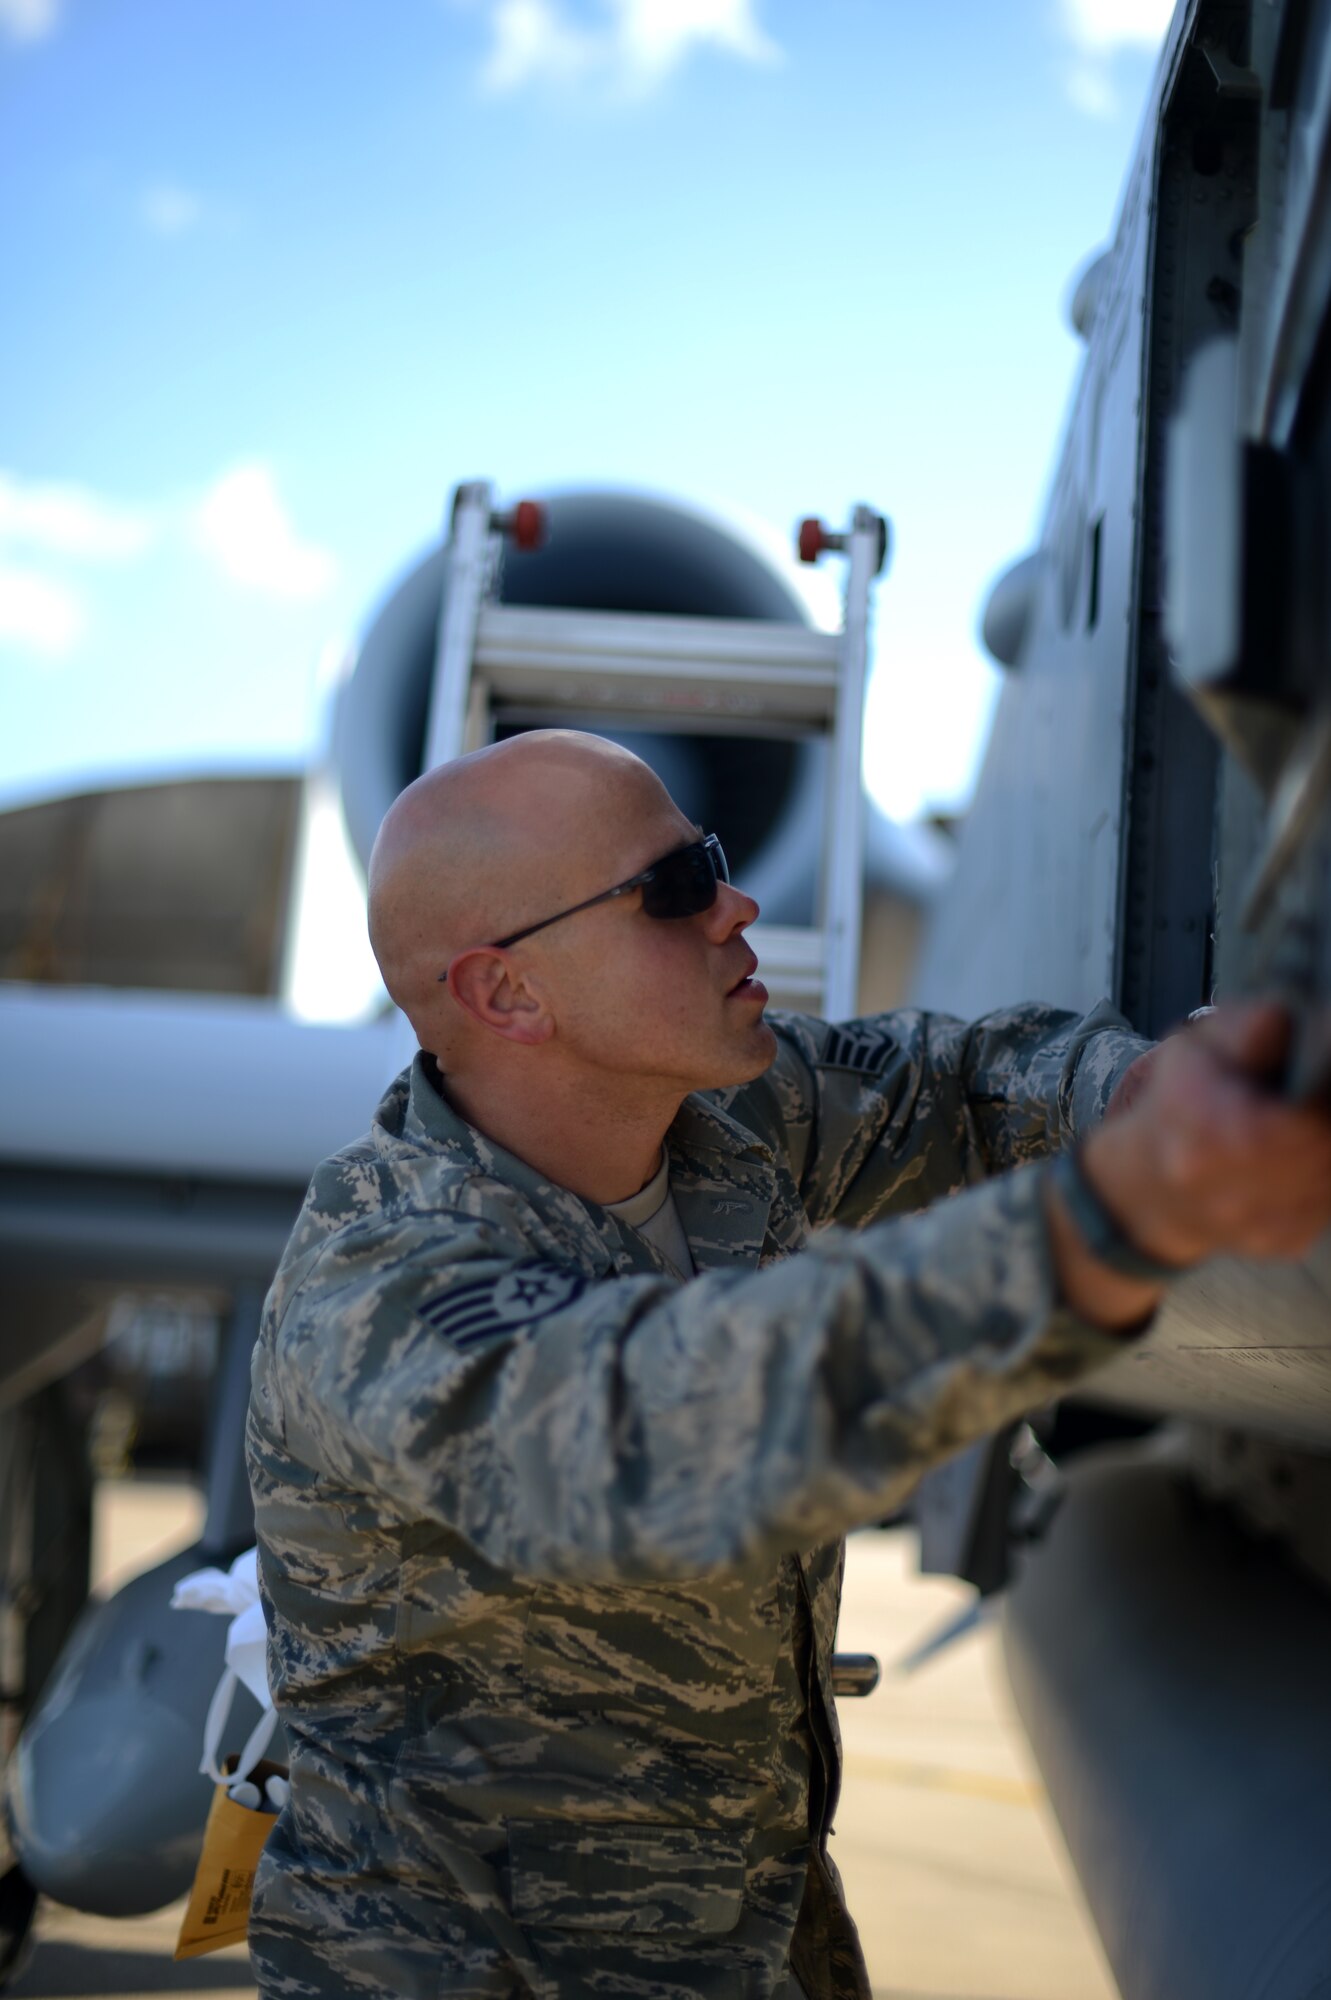 U.S. Air Force Staff Sgt. William McBride, 124th Aircraft Maintenance Squadron crew chief from Boise, Idaho, inspects a panel of a U.S. Air Force A-10 Thunderbolt II attack aircraft on the flightline at Spangdahlem Air Base, Germany, May 16, 2014. Airmen complete post-flight checks to ensure aircraft are safe and ready to fly for their next mission. The aircraft and personnel flew to Germany to support NATO allies in Exercise Combined Resolve II. (U.S. Air Force photo by Senior Airman Gustavo Castillo/Released) 